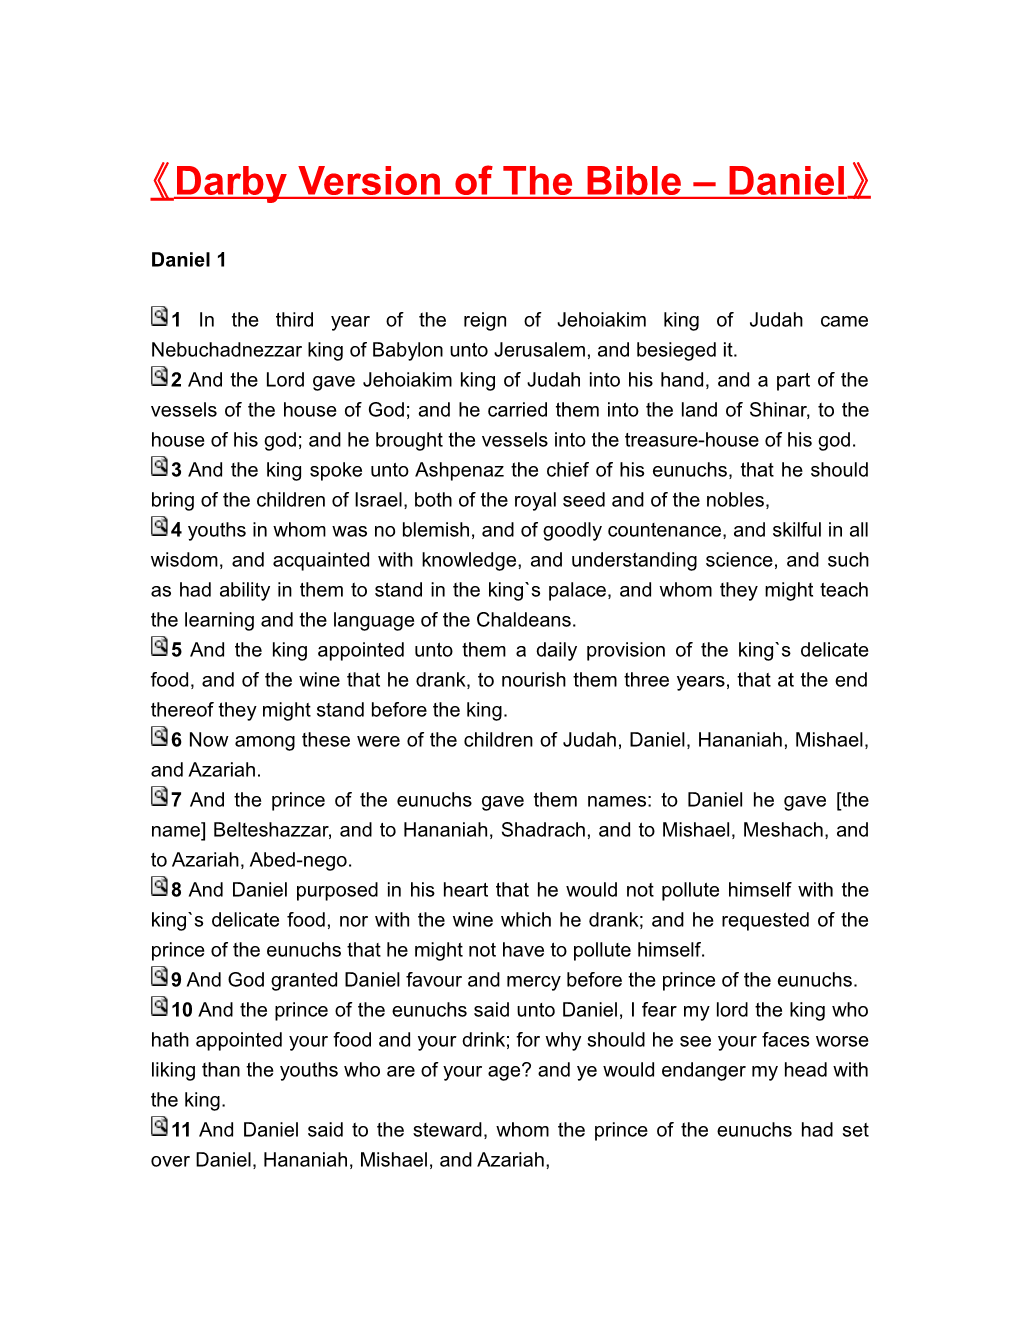 Darby Version of the Bible Daniel